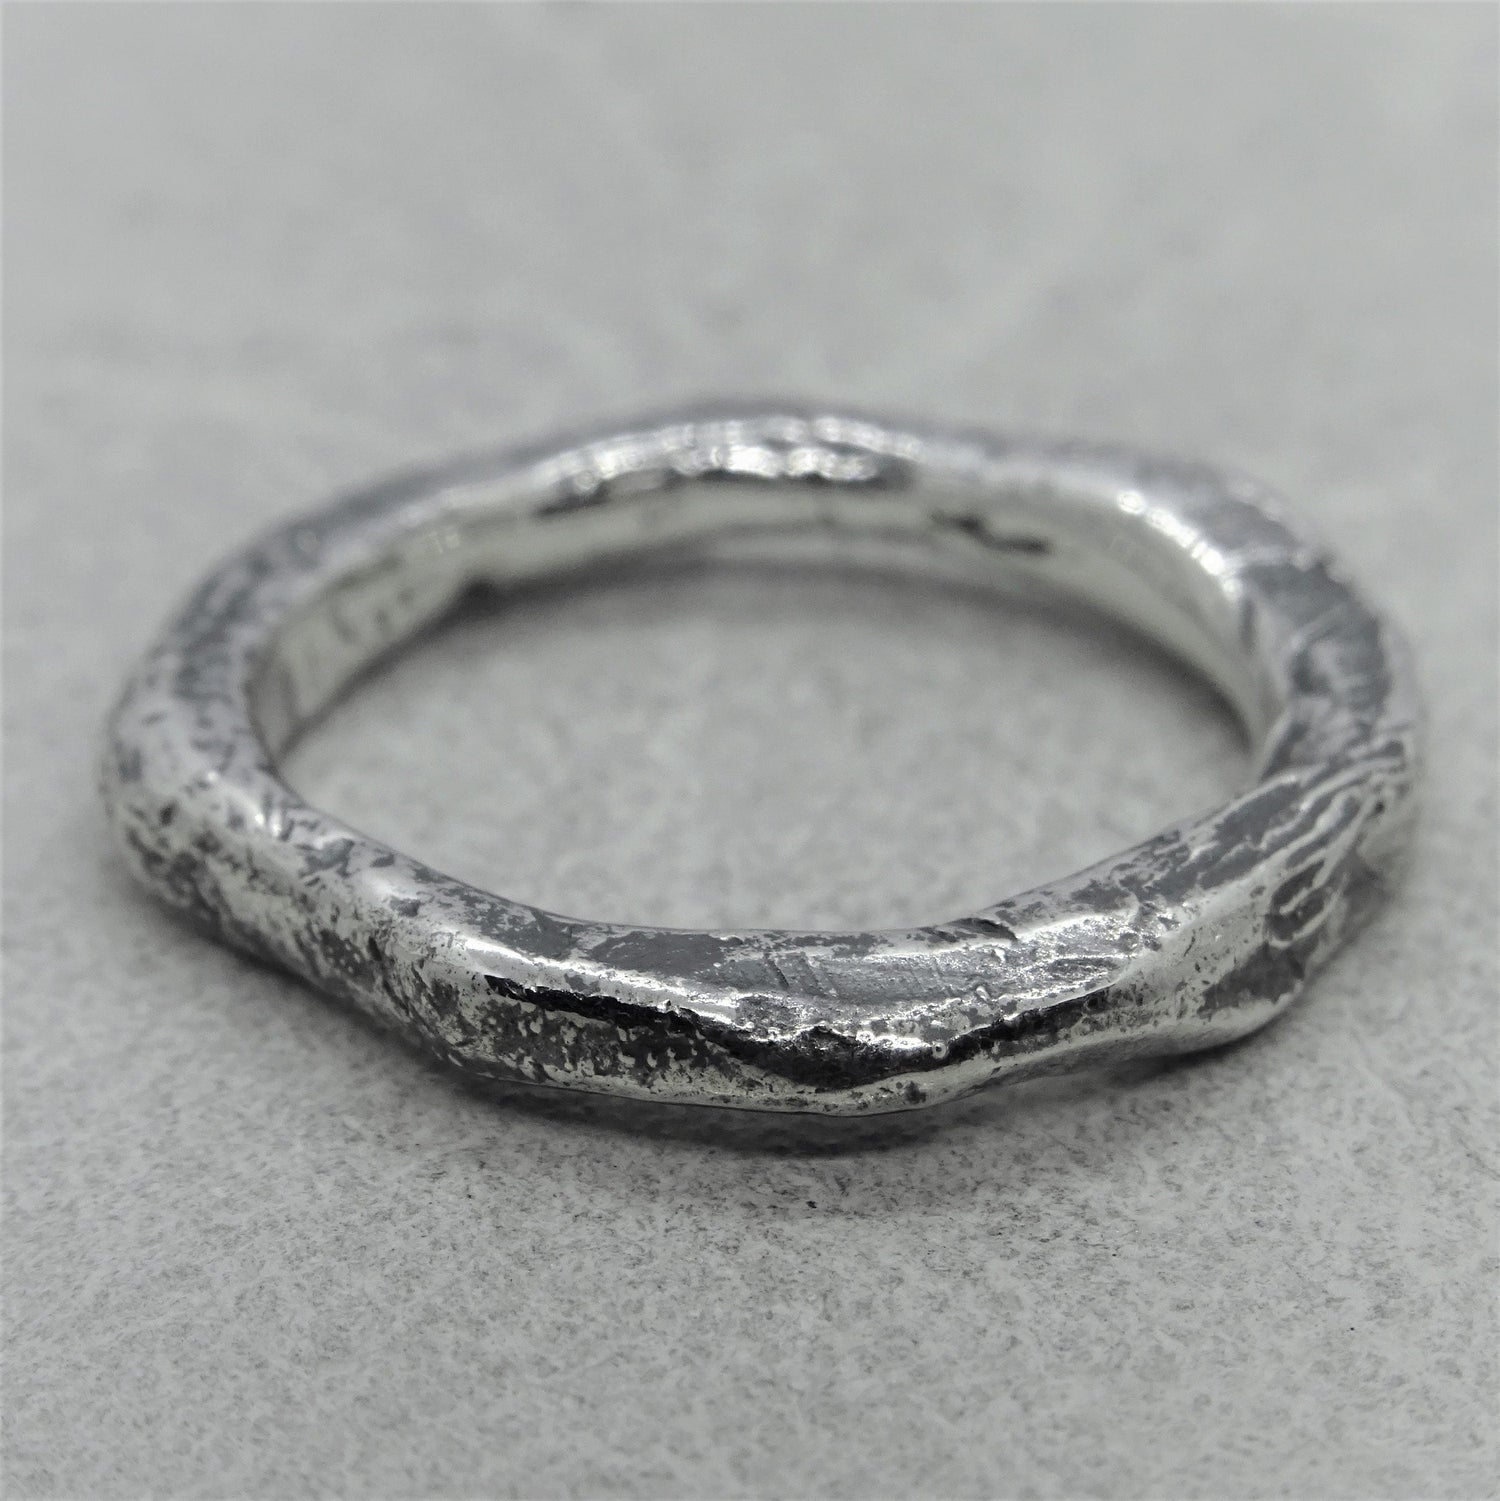 Mono ring- simple minimalist ring with soft scratched texture Lightweight rings Project50g 